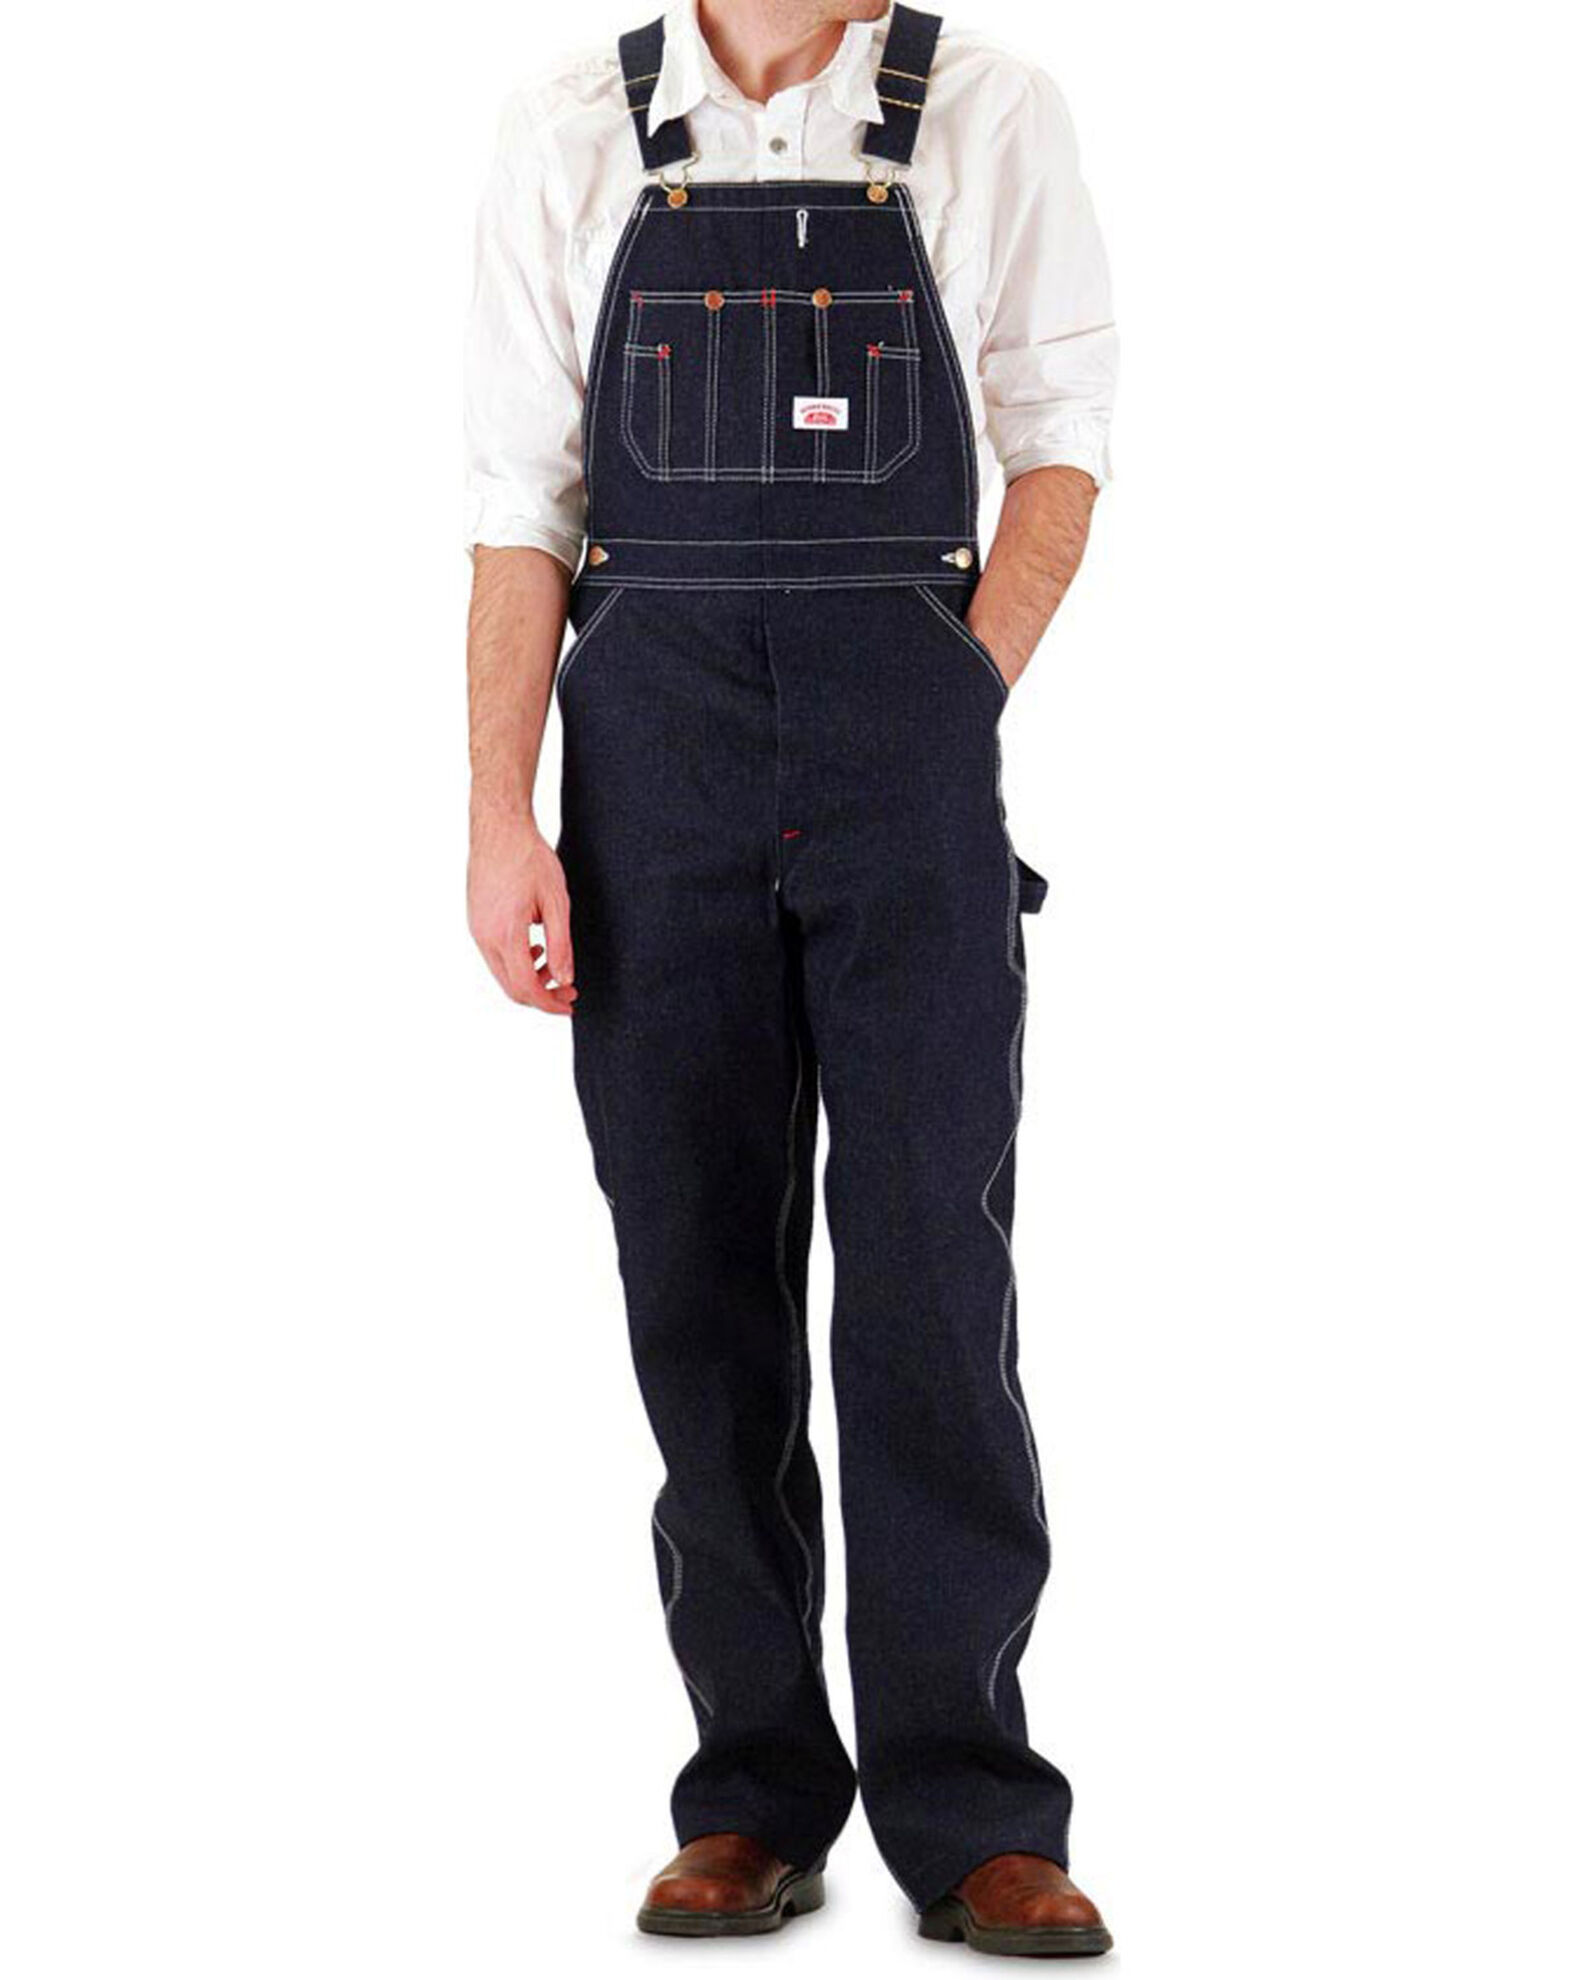 Round House Men's Overalls - Big & Tall